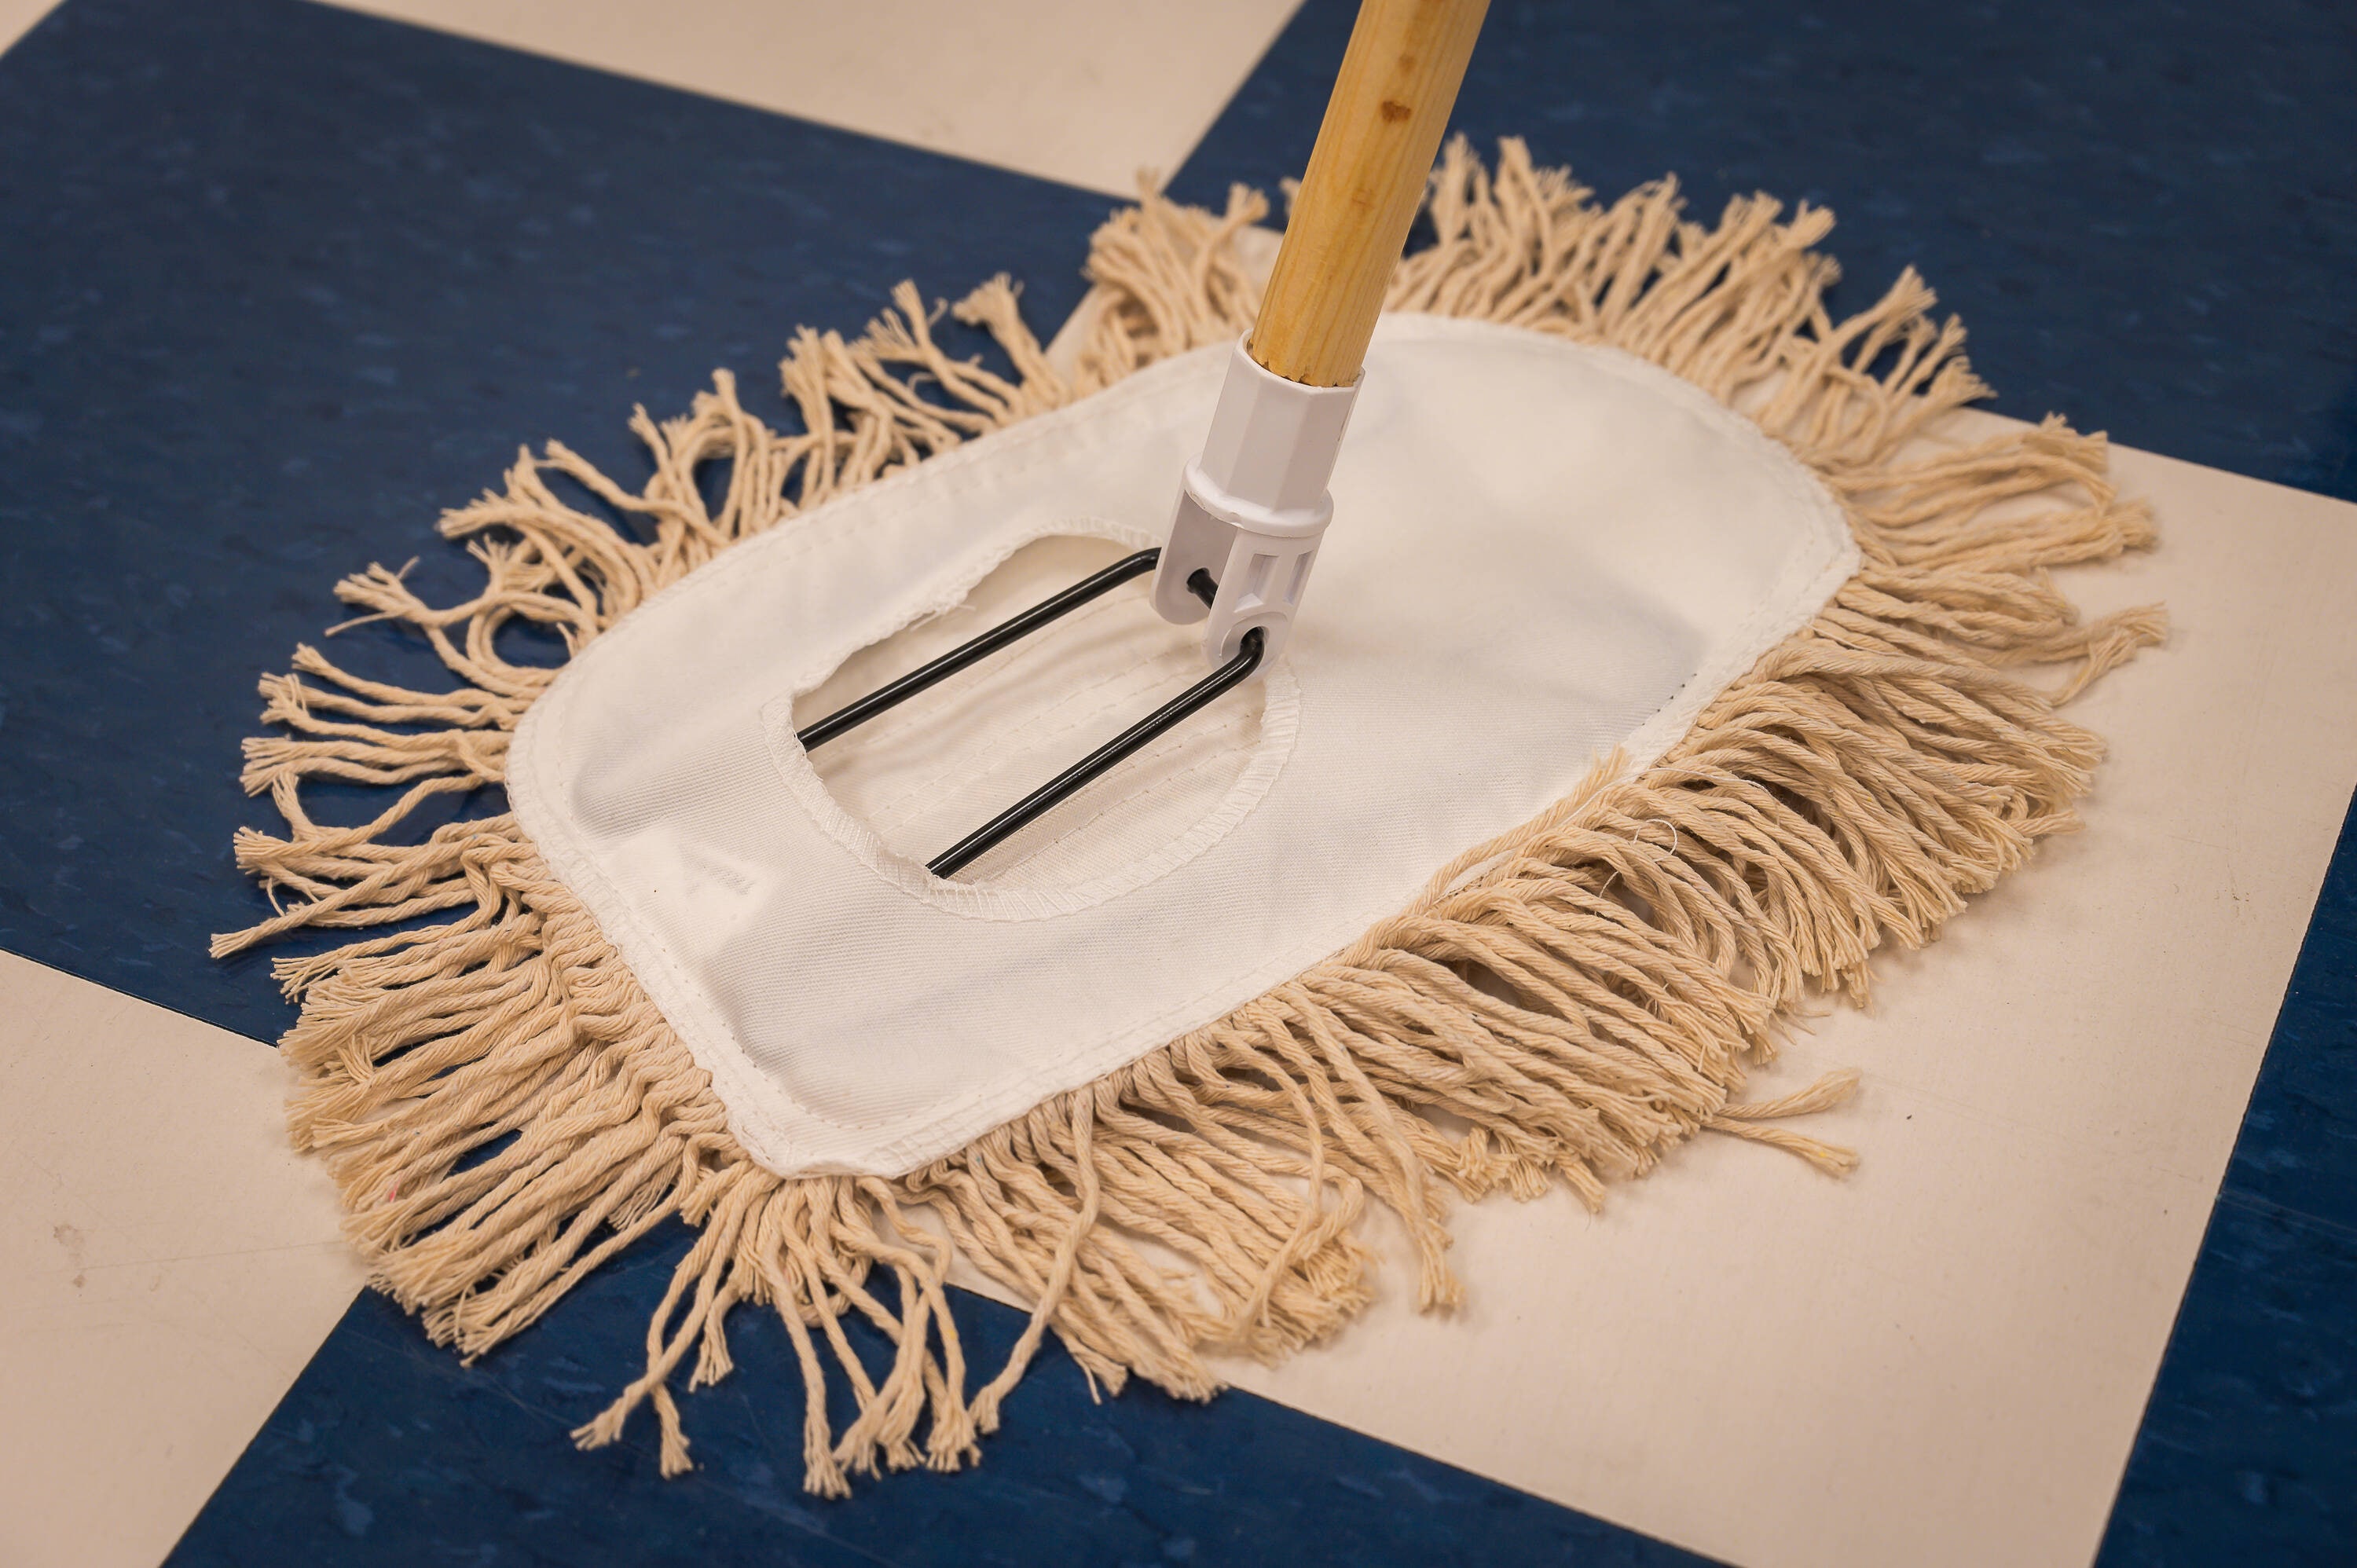 Cotton Dish Mop with Wood Handle